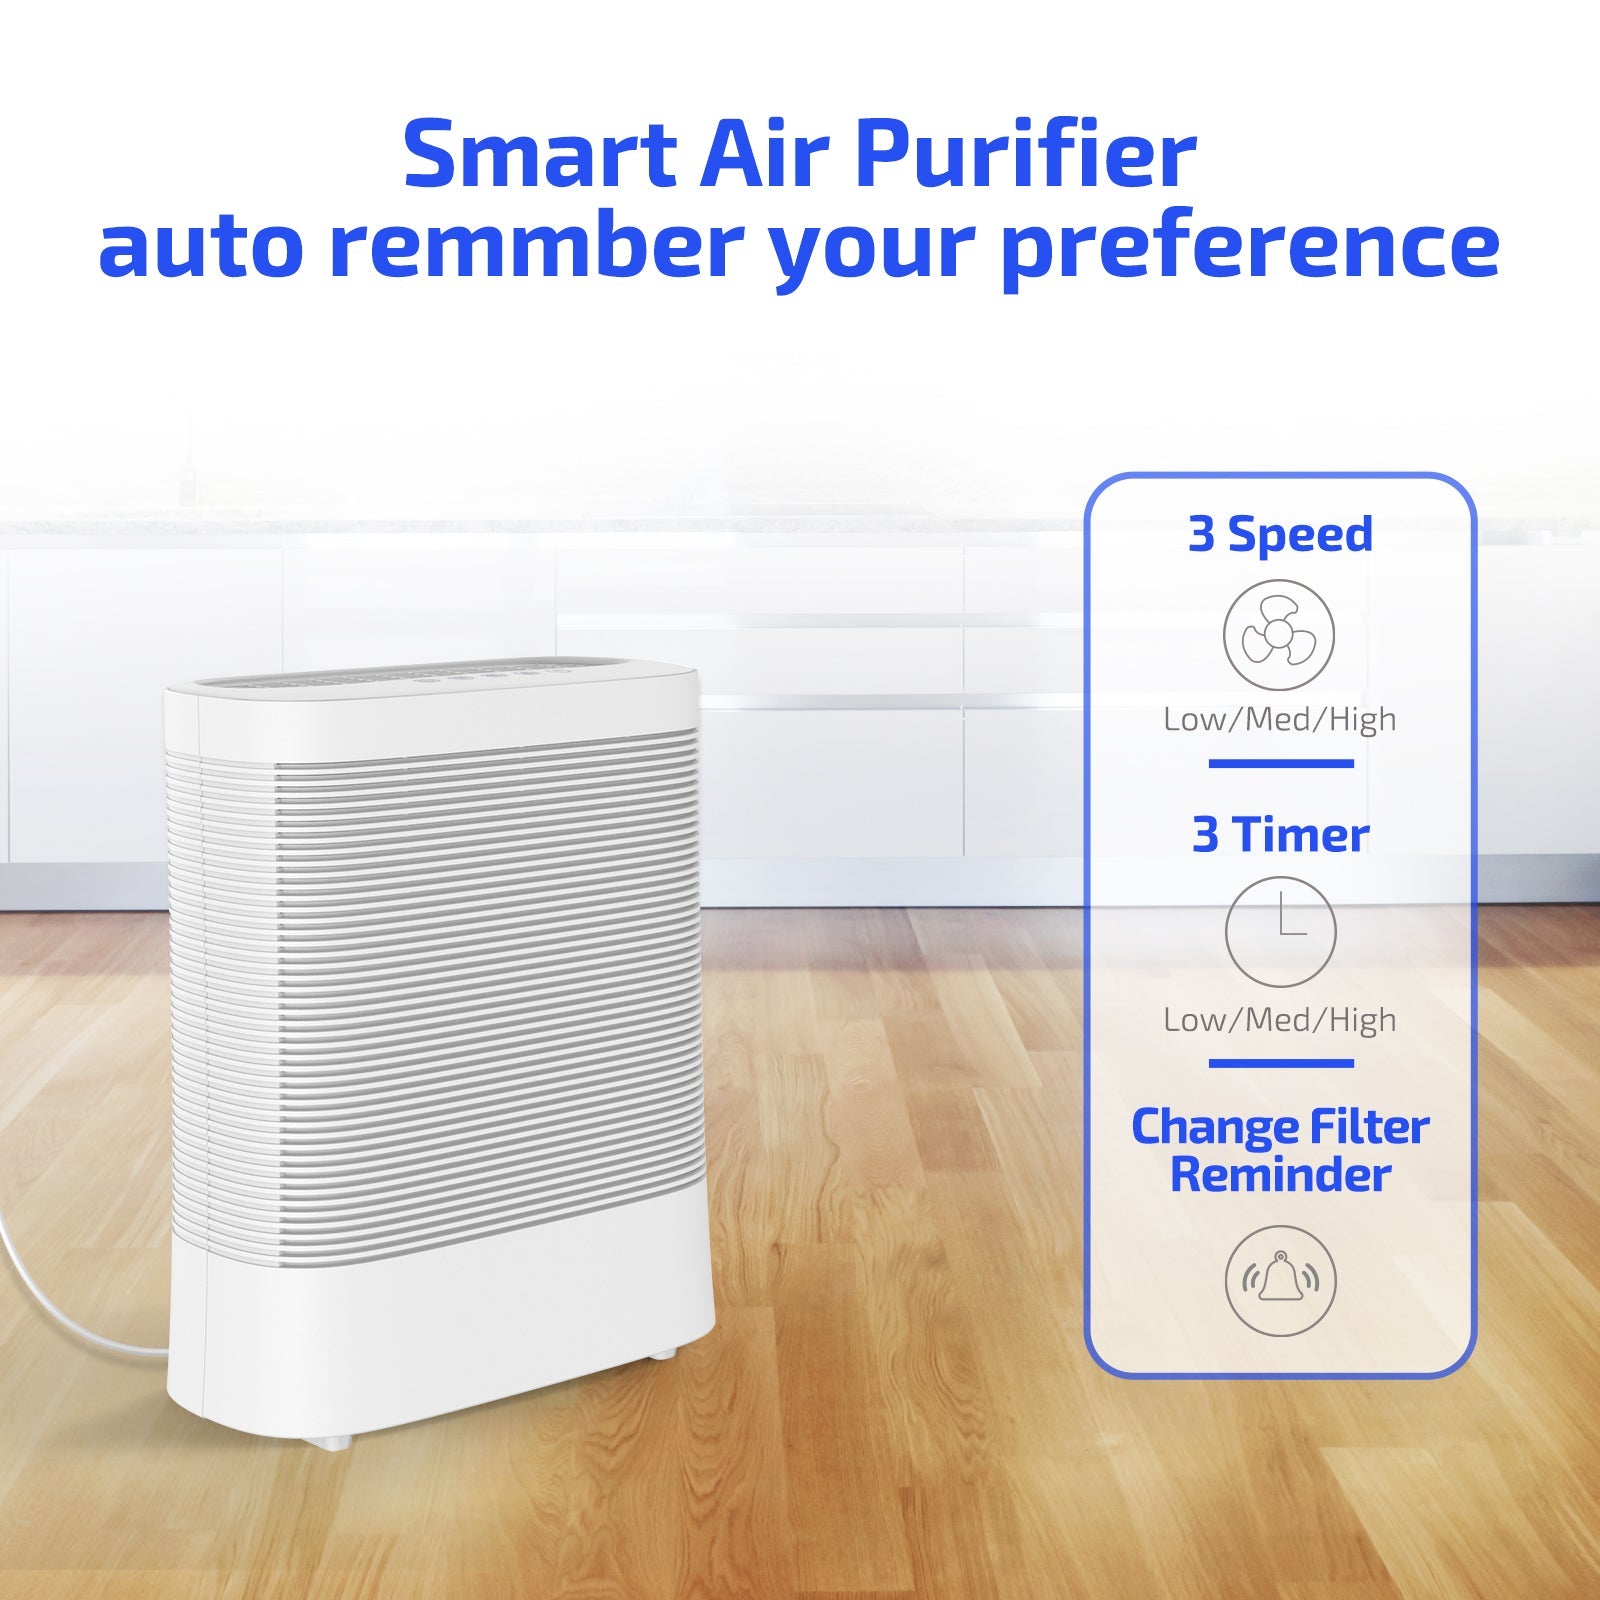 VAVA Air Purifiers 004,with UV-C Light Sanitizer, Purifier with 3 in1 True HEPA Fits